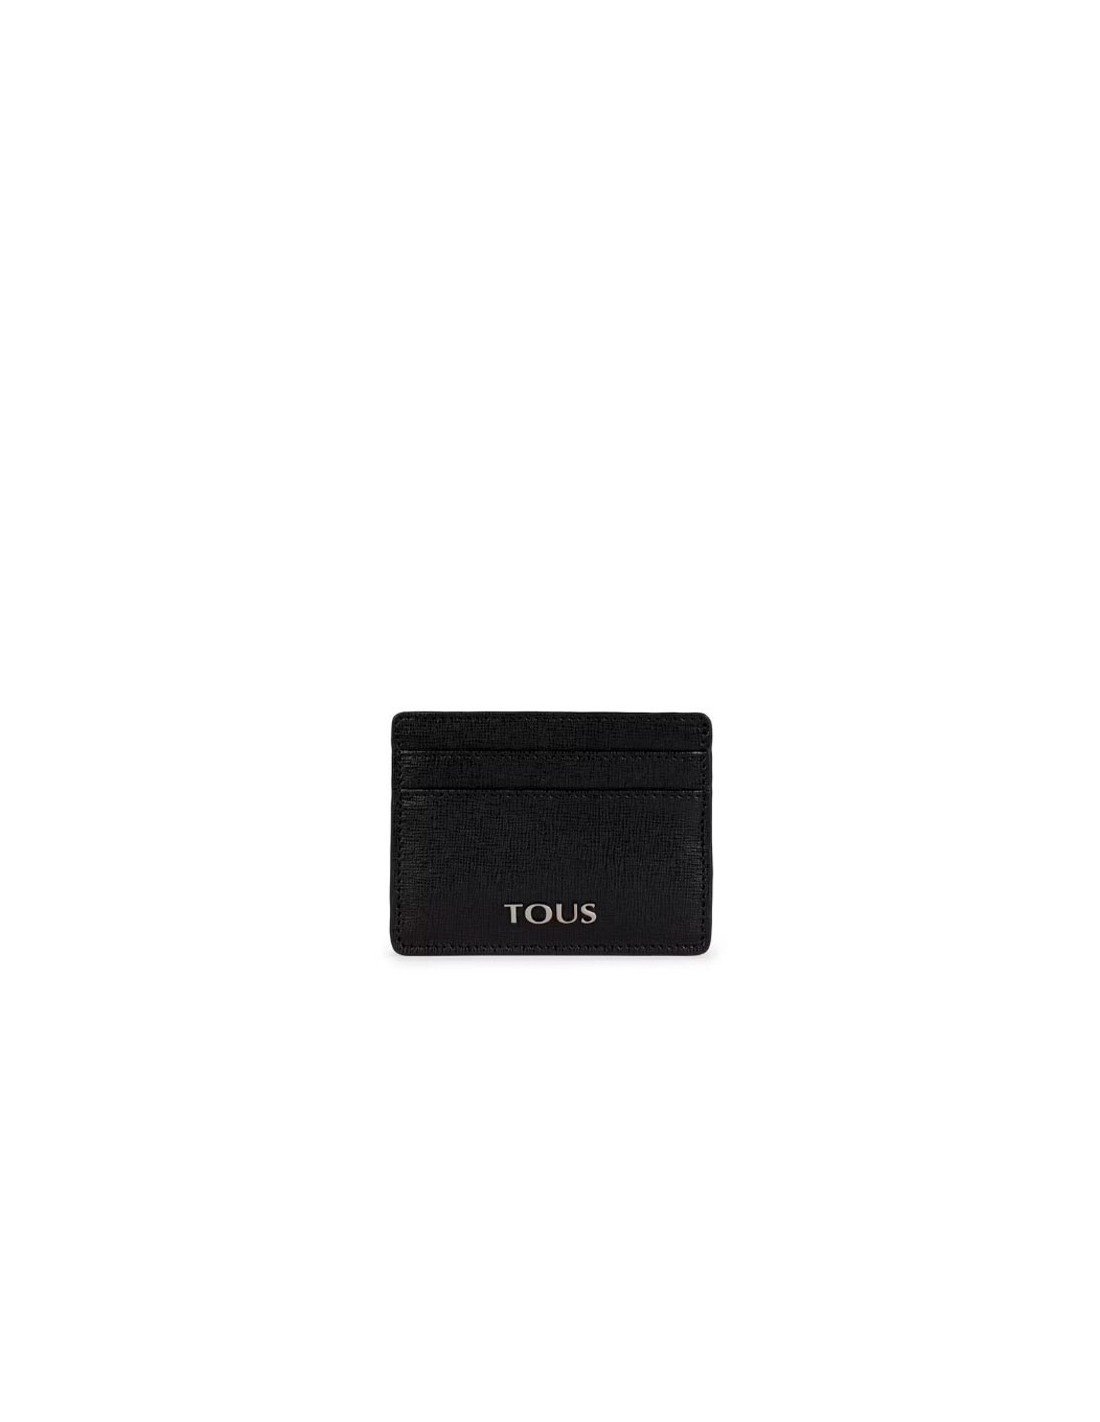 Tous leather card holder in black from the New Berlin collection